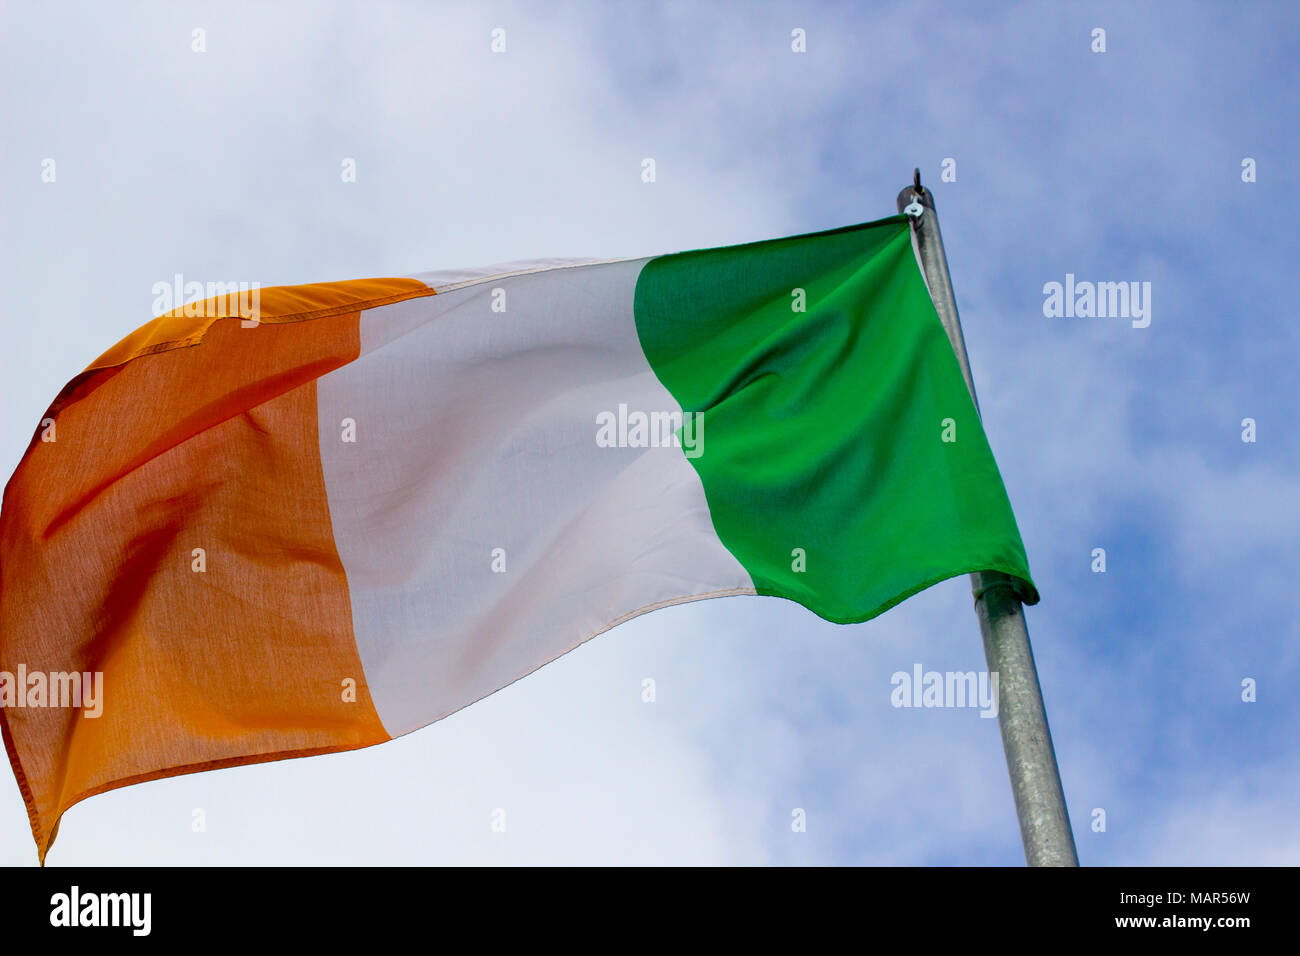 An Irish tricolour the national flag of the Republic of Ireland flying in a stiff breeze Stock Photo